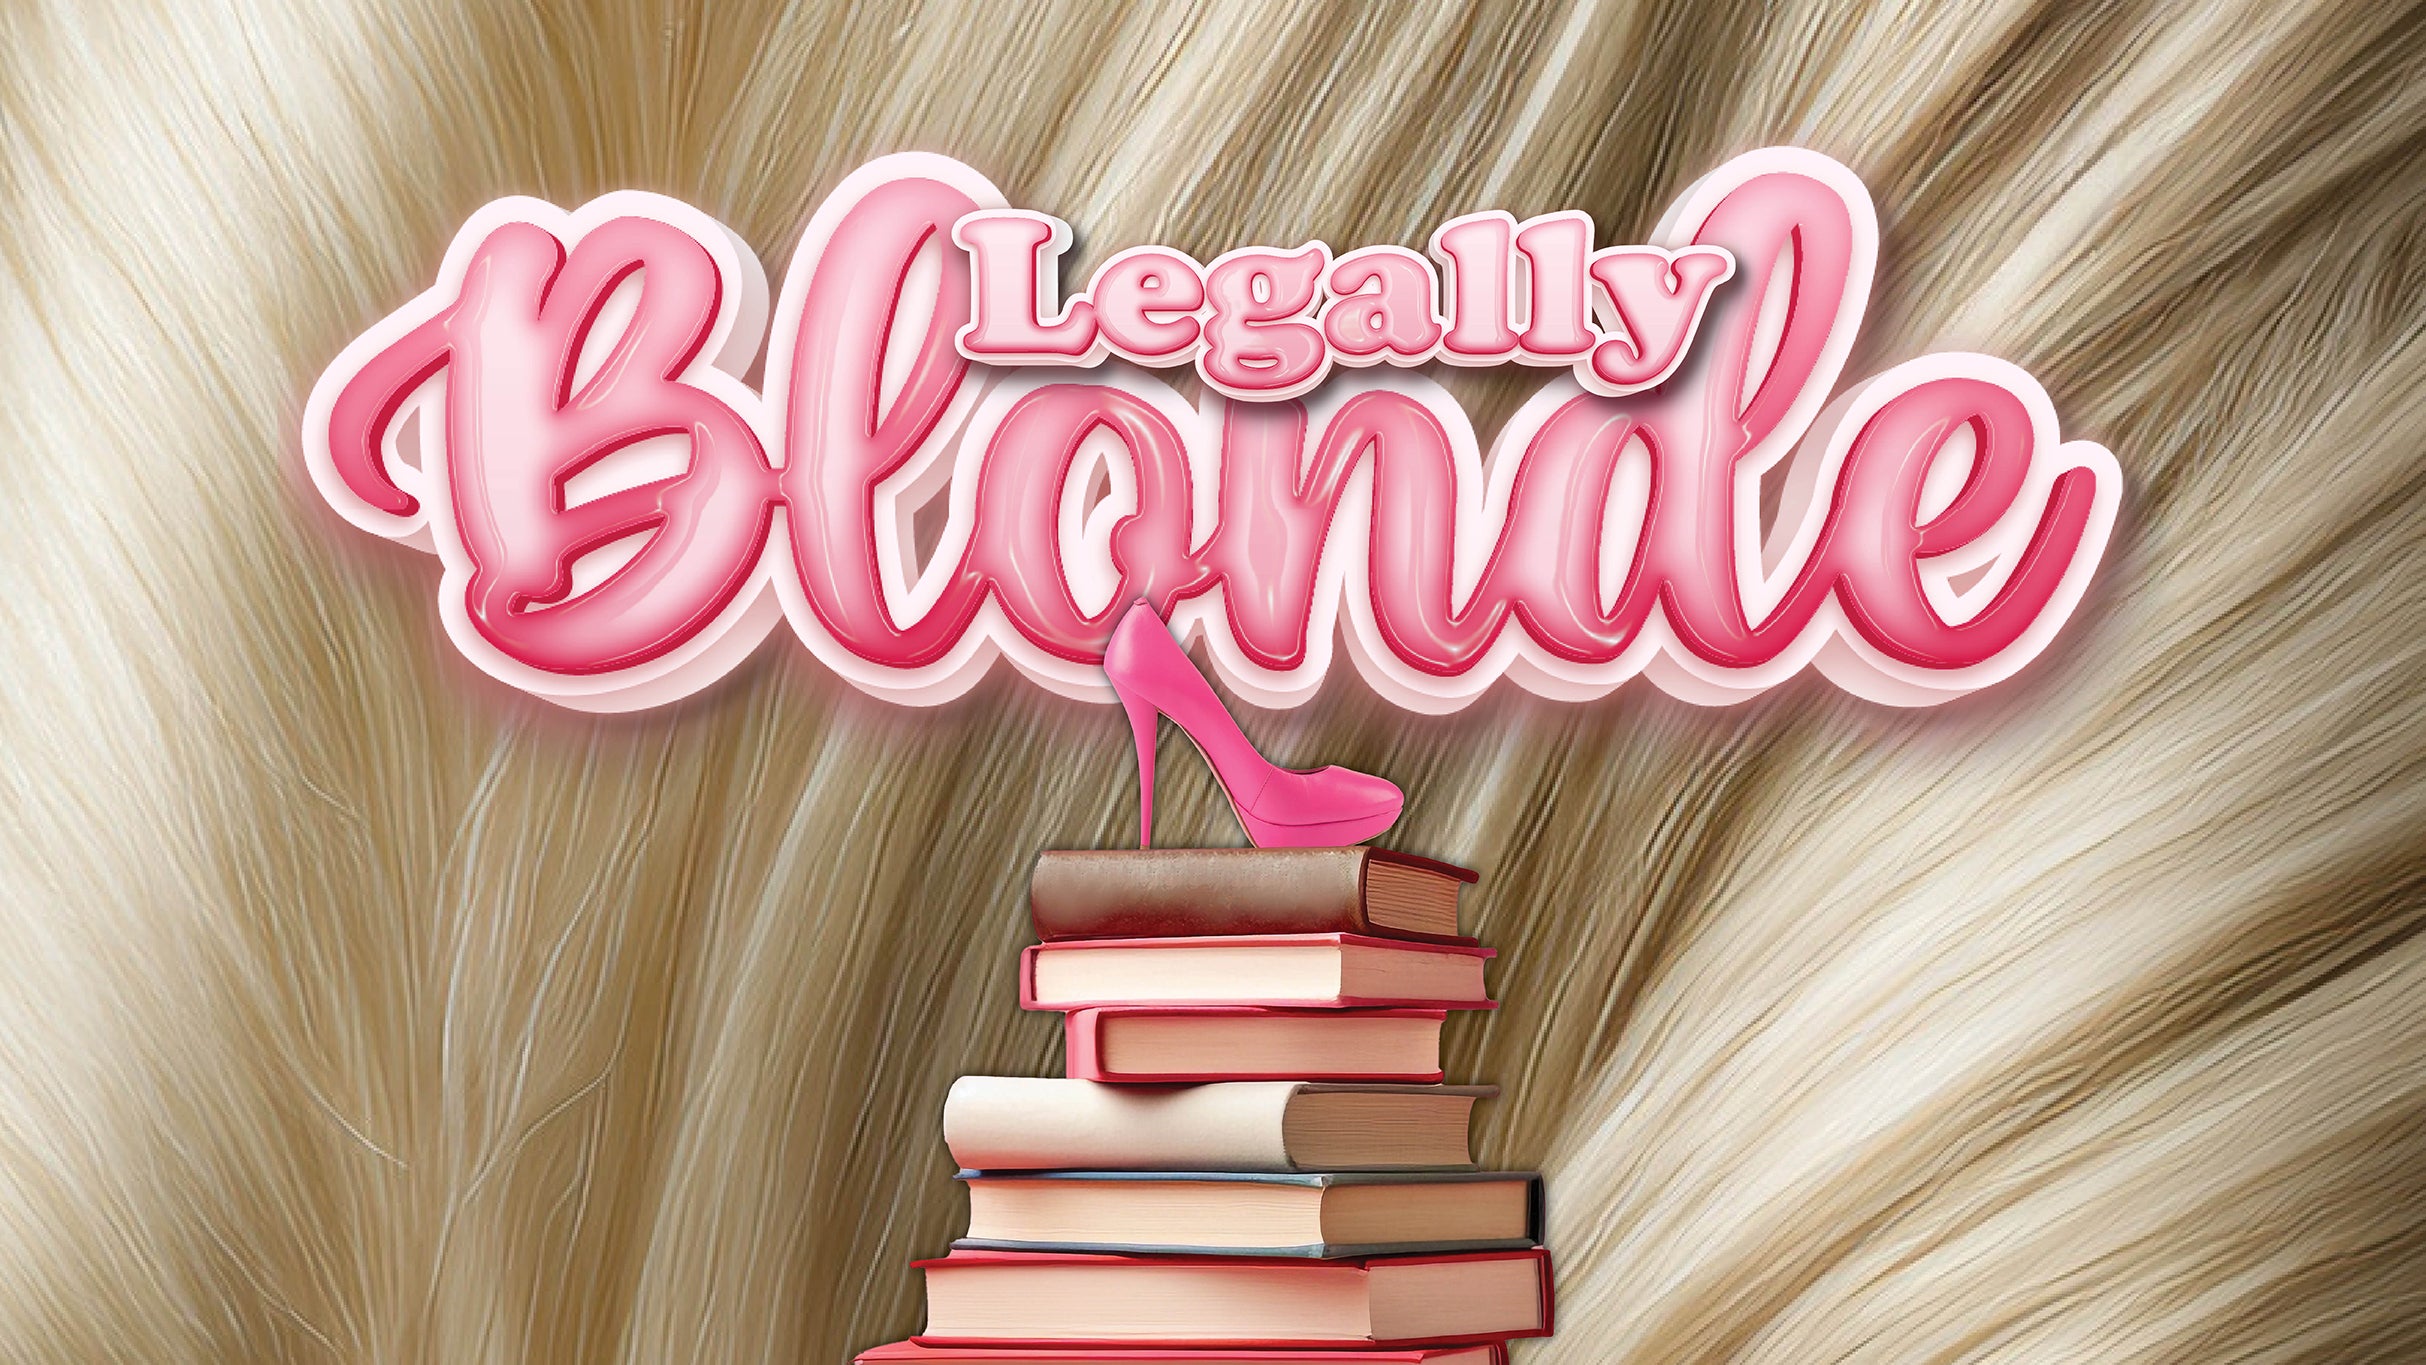 Legally Blonde at Byers Theatre